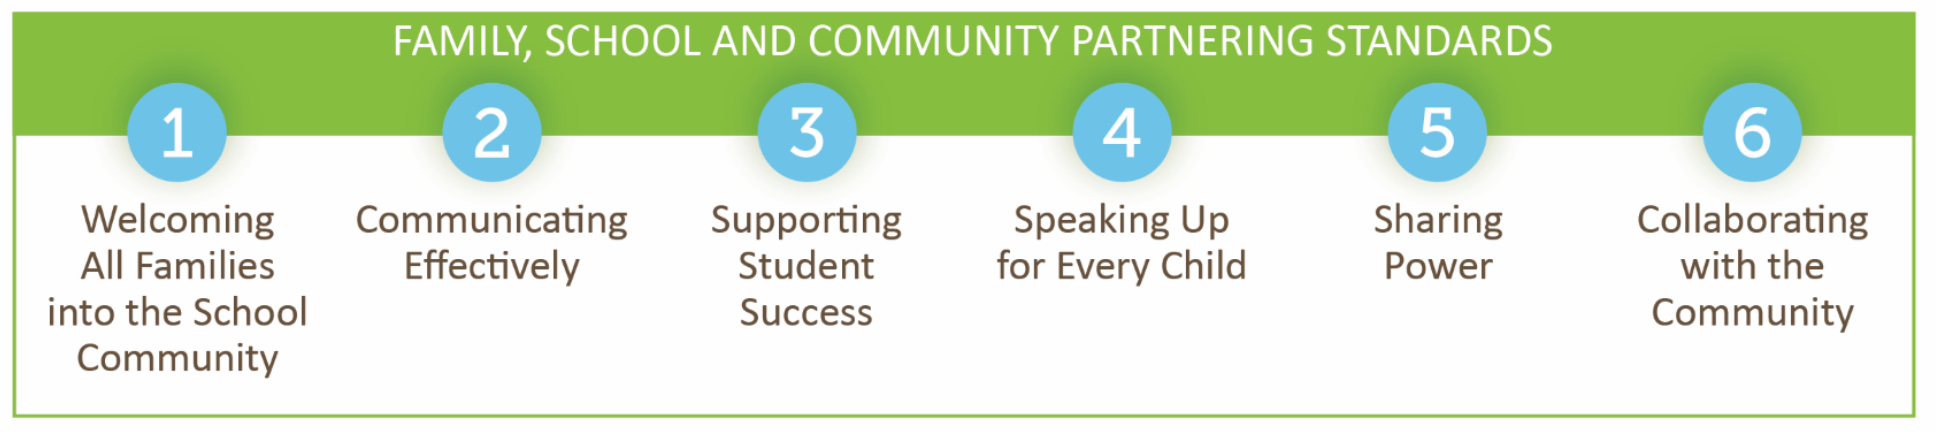 Family, School, and Community Partnering Standards- 1. Welcoming all families into the school community 2. Communicating effectively 3. Supporting student success 4. Speaking up for every child 5. Sharing power 6. Collaborating with the community